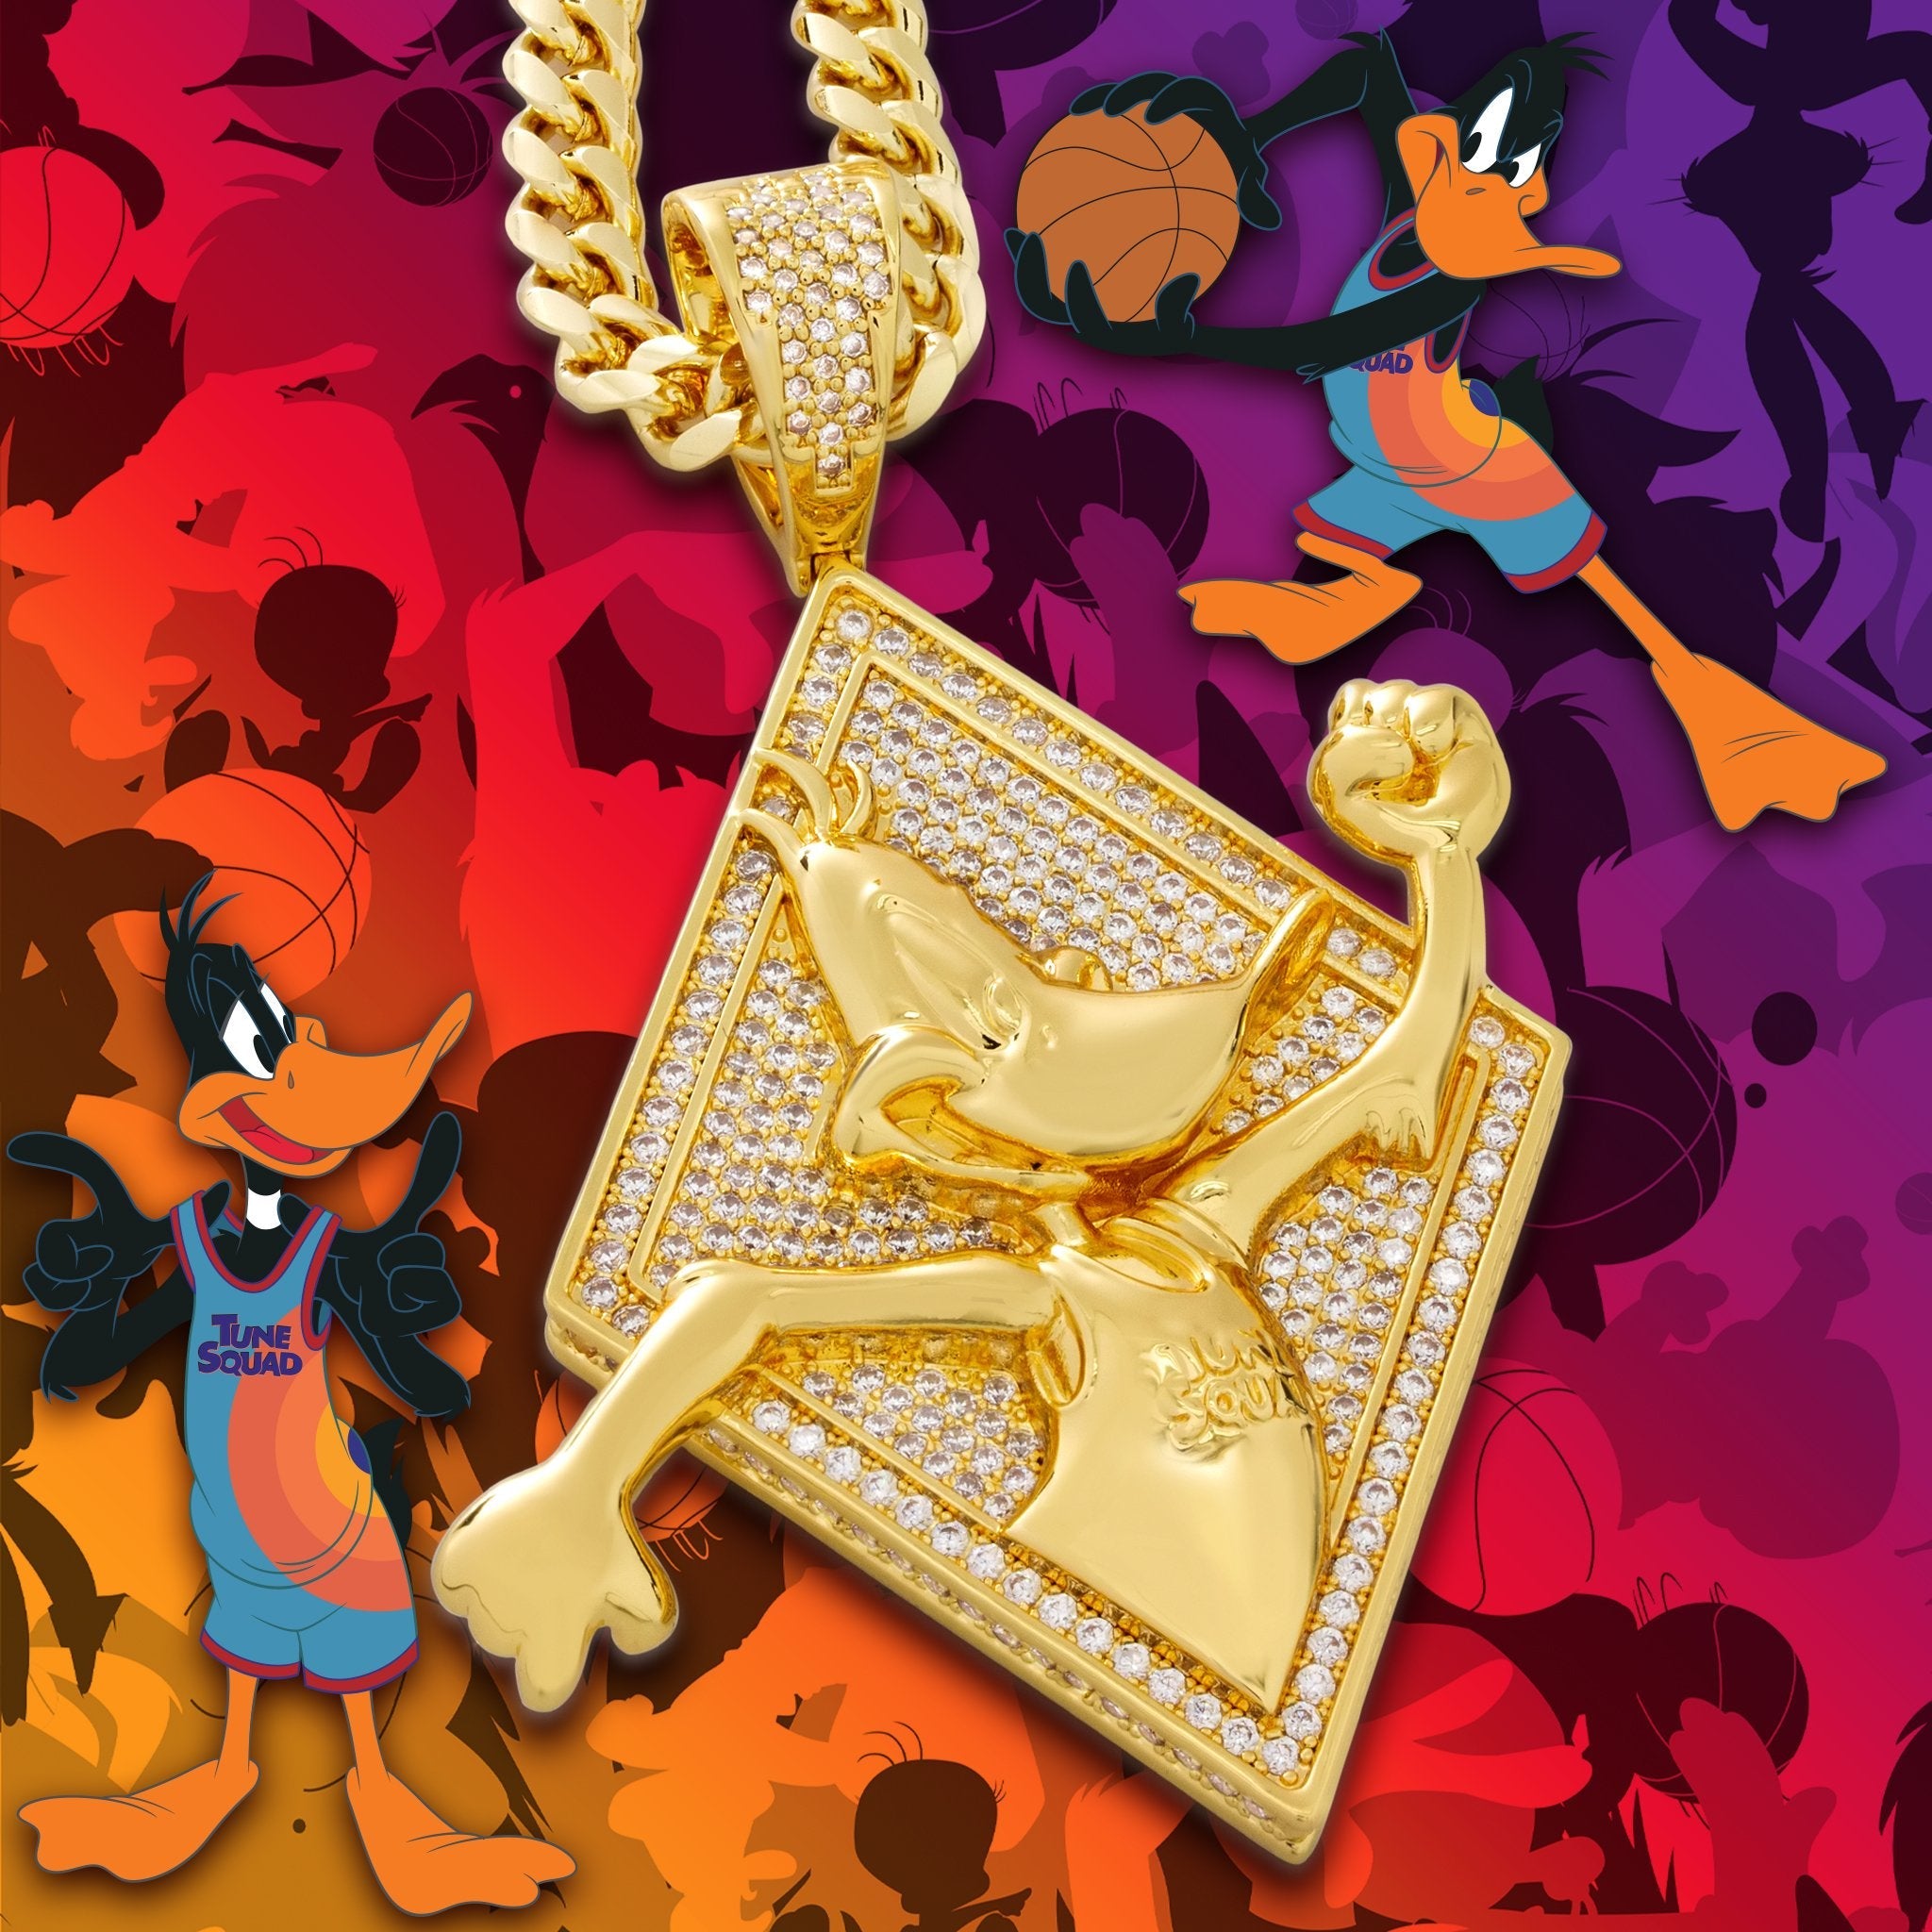 Space Jam x King Ice - Daffy Duck Necklace